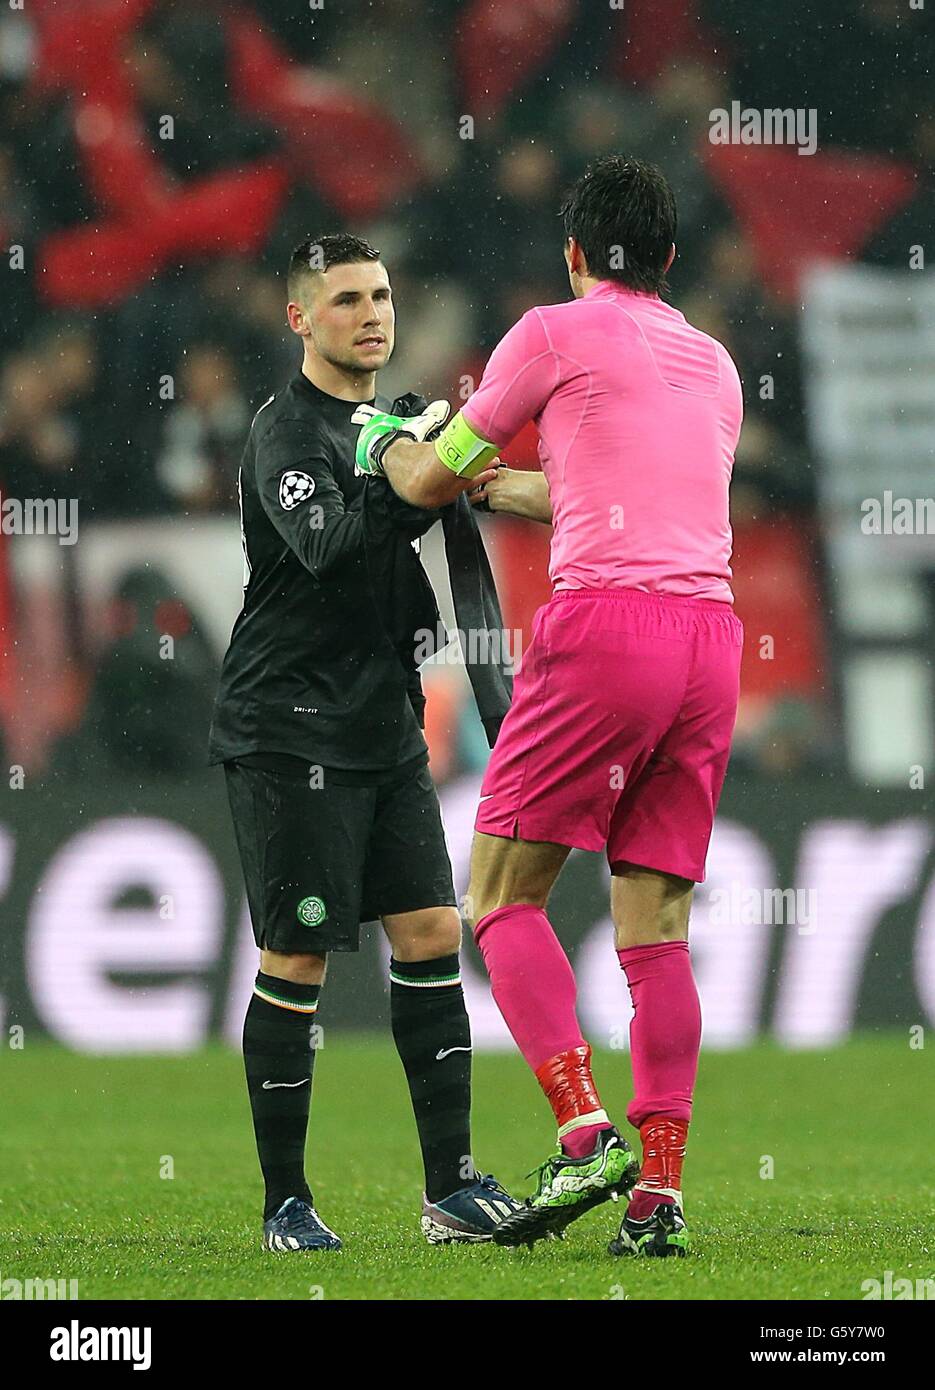 Soccer - UEFA Champions League - Round of 16 - Second Leg - Juventus v Celtic - Juventus Stadium. Juventus goalkeeper Gianluigi Buffon (right) and Celtic's Gary Hooper (left) after the final whistle Stock Photo